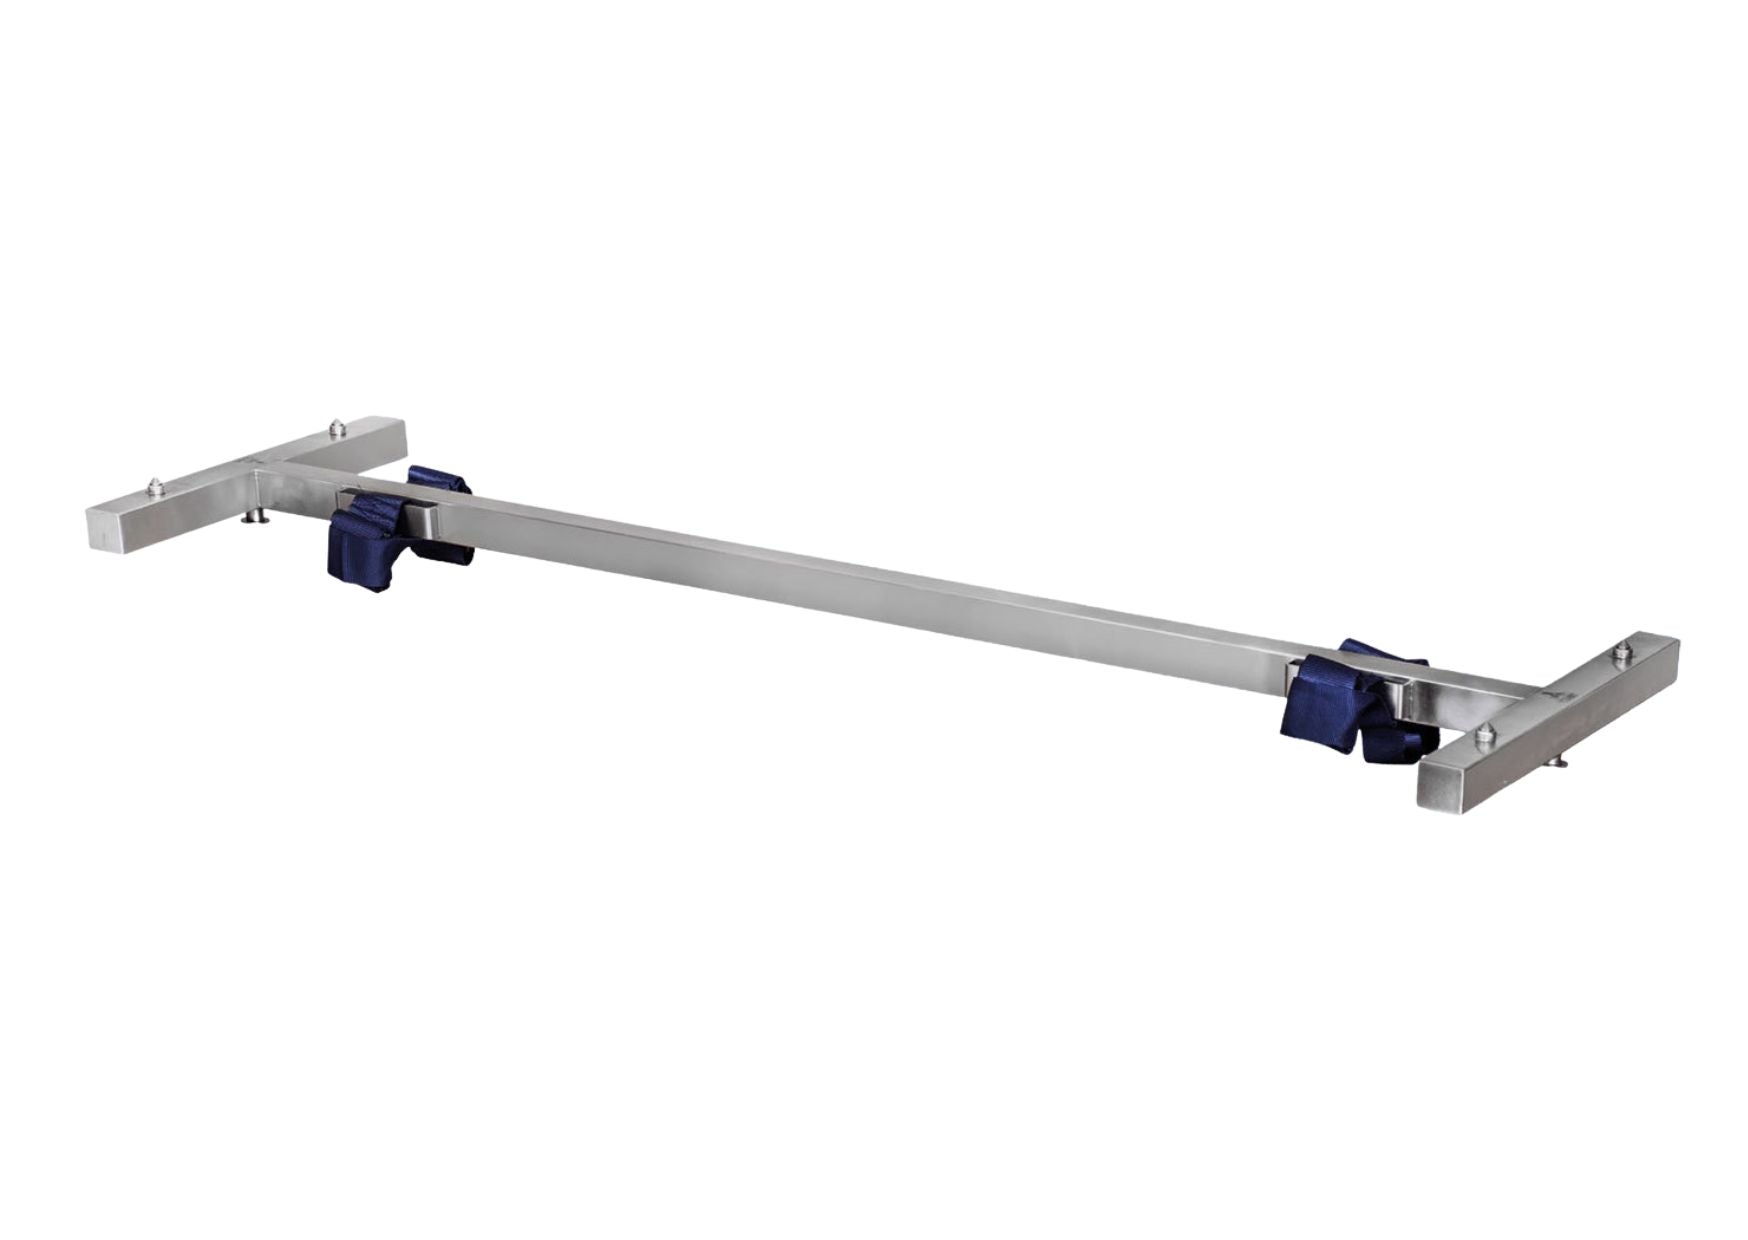 Adjustable coffin holder for roll-in chassis